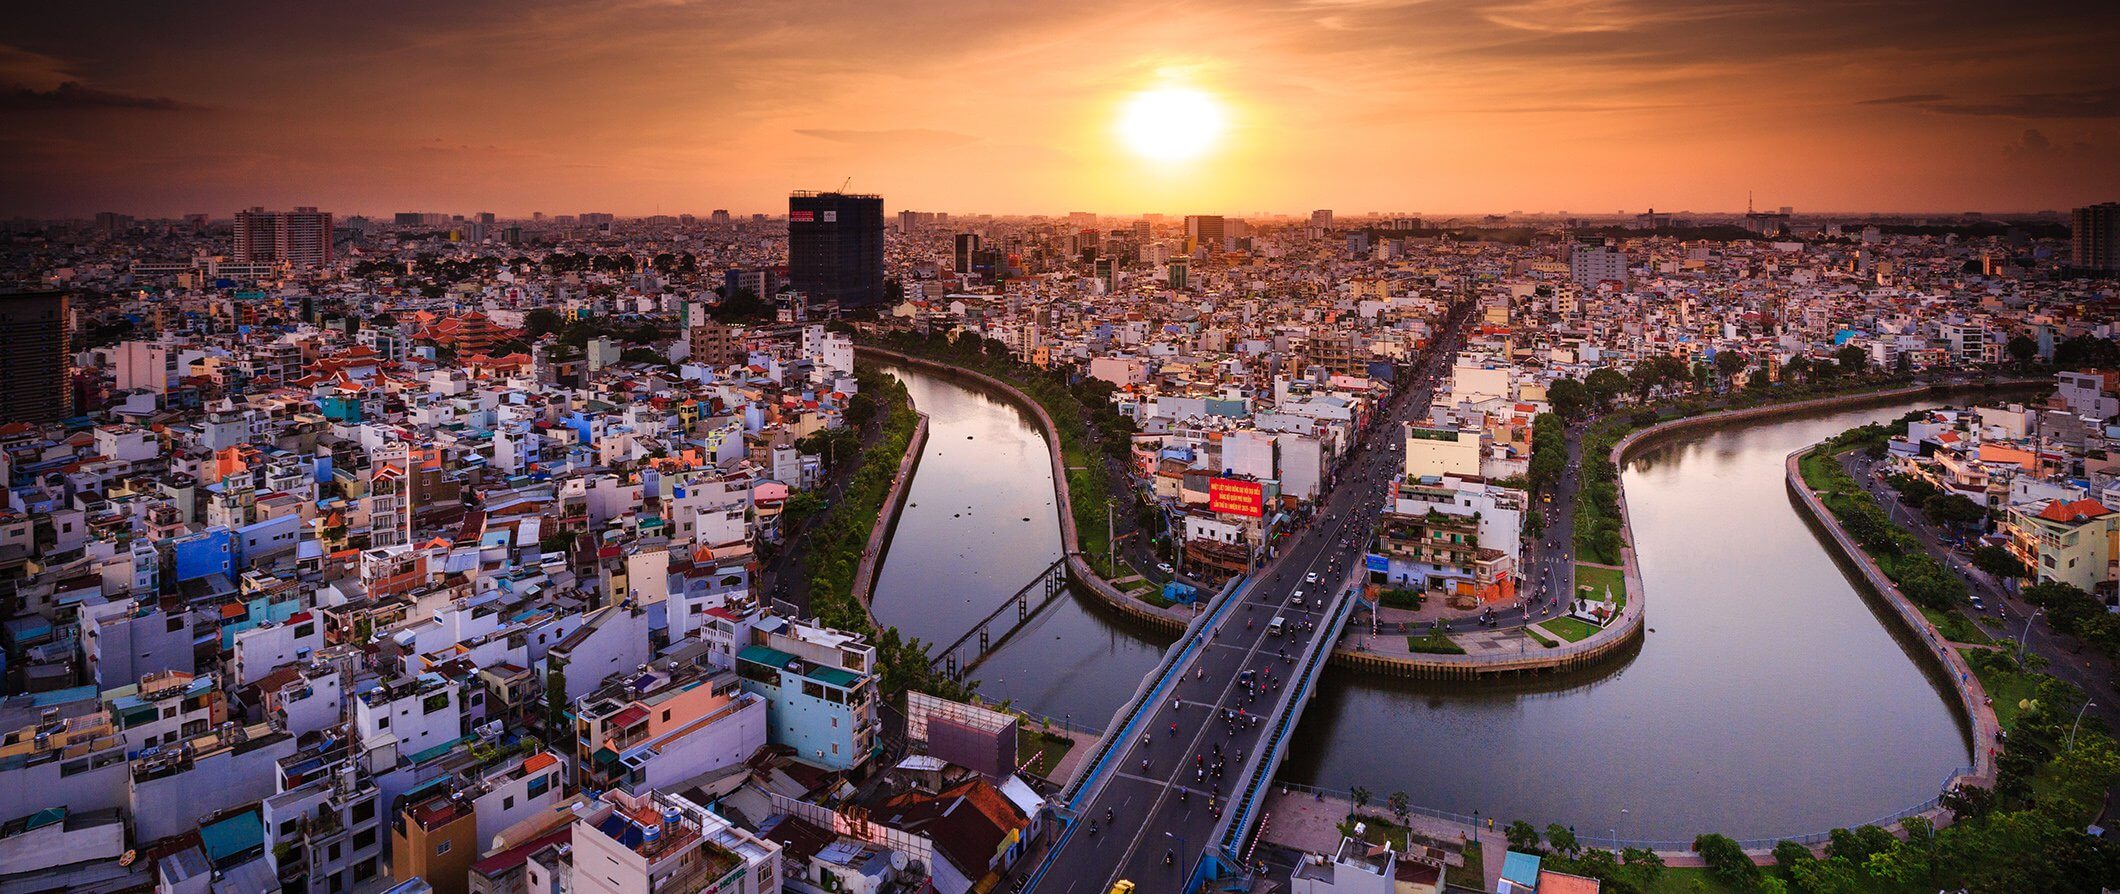 Areal image of Hochi. River, sunset, houses, and cars on a bridge.